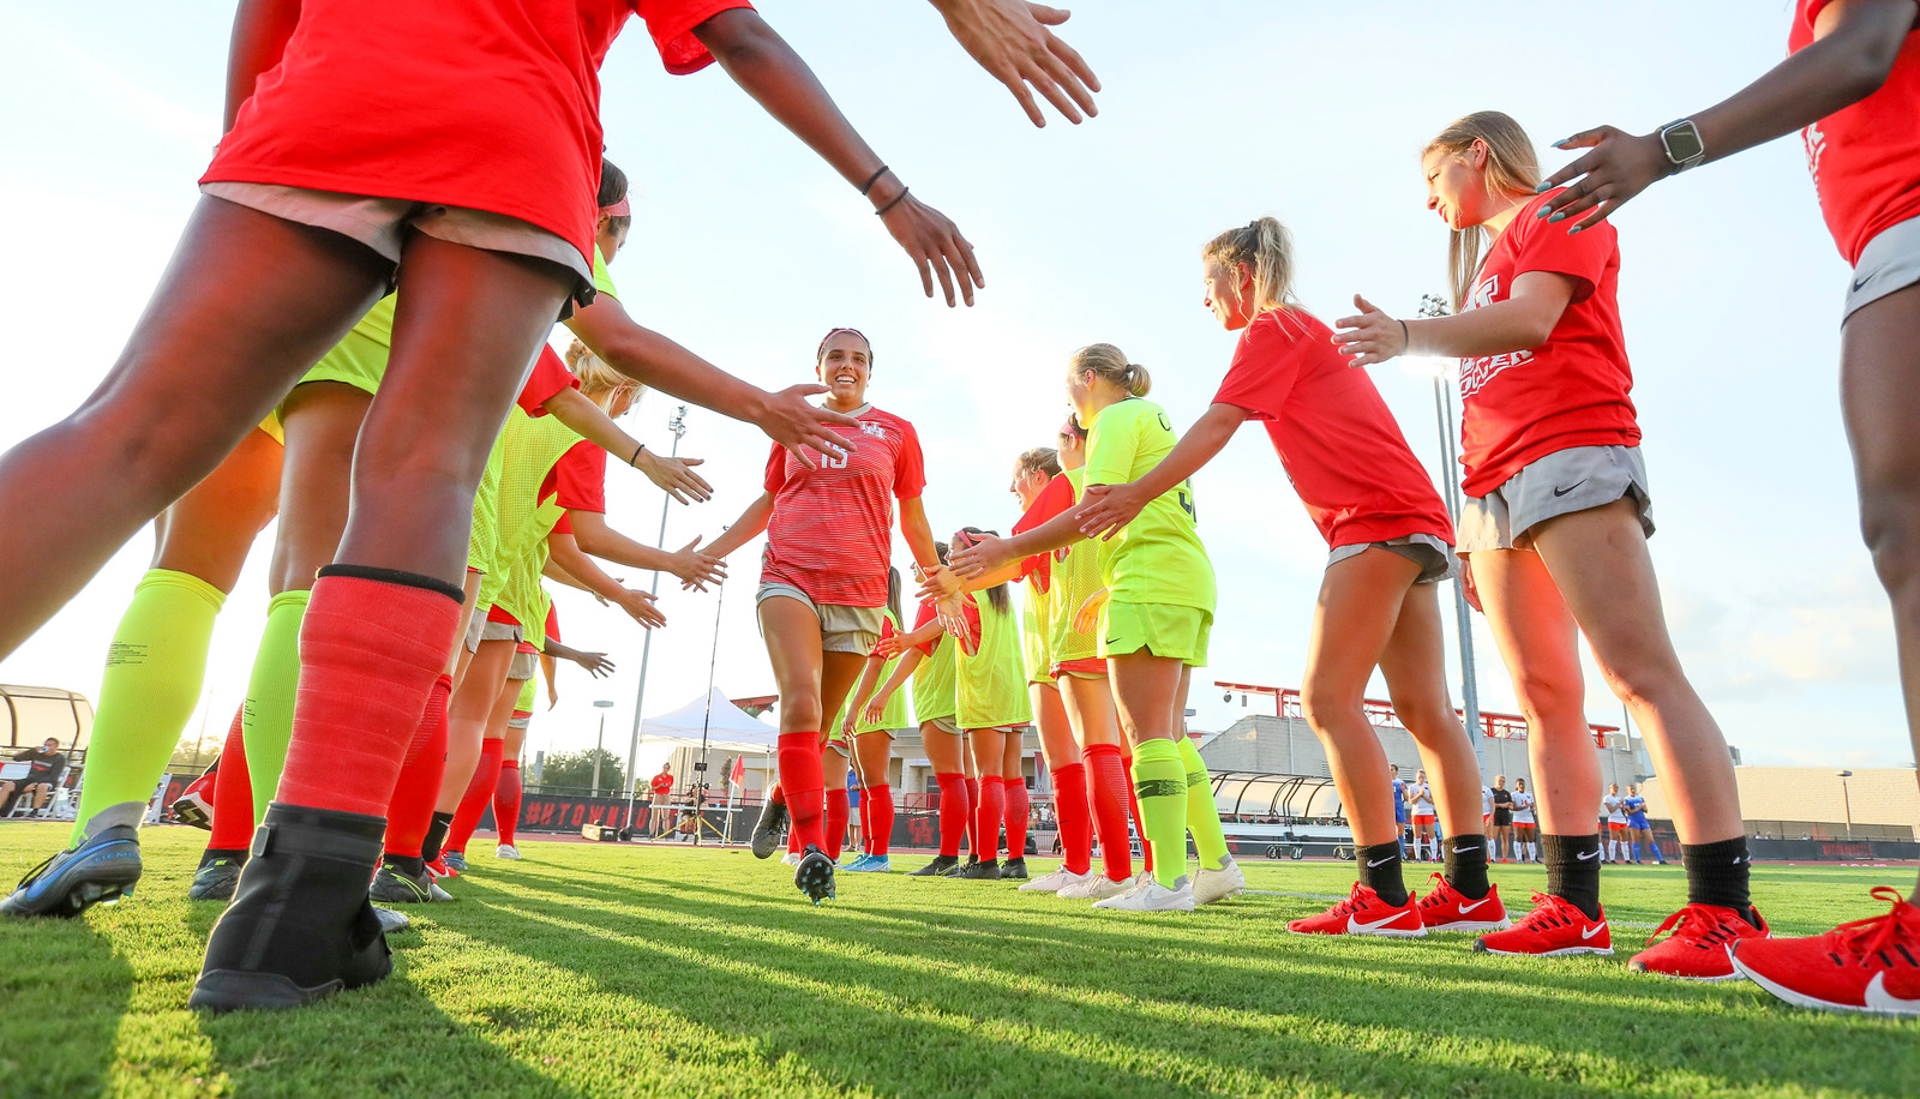 The UH soccer team and UTSA played two different overtime periods but were unable to break the 0-0 tie on Wednesday evening. | Courtesy of UH athletics